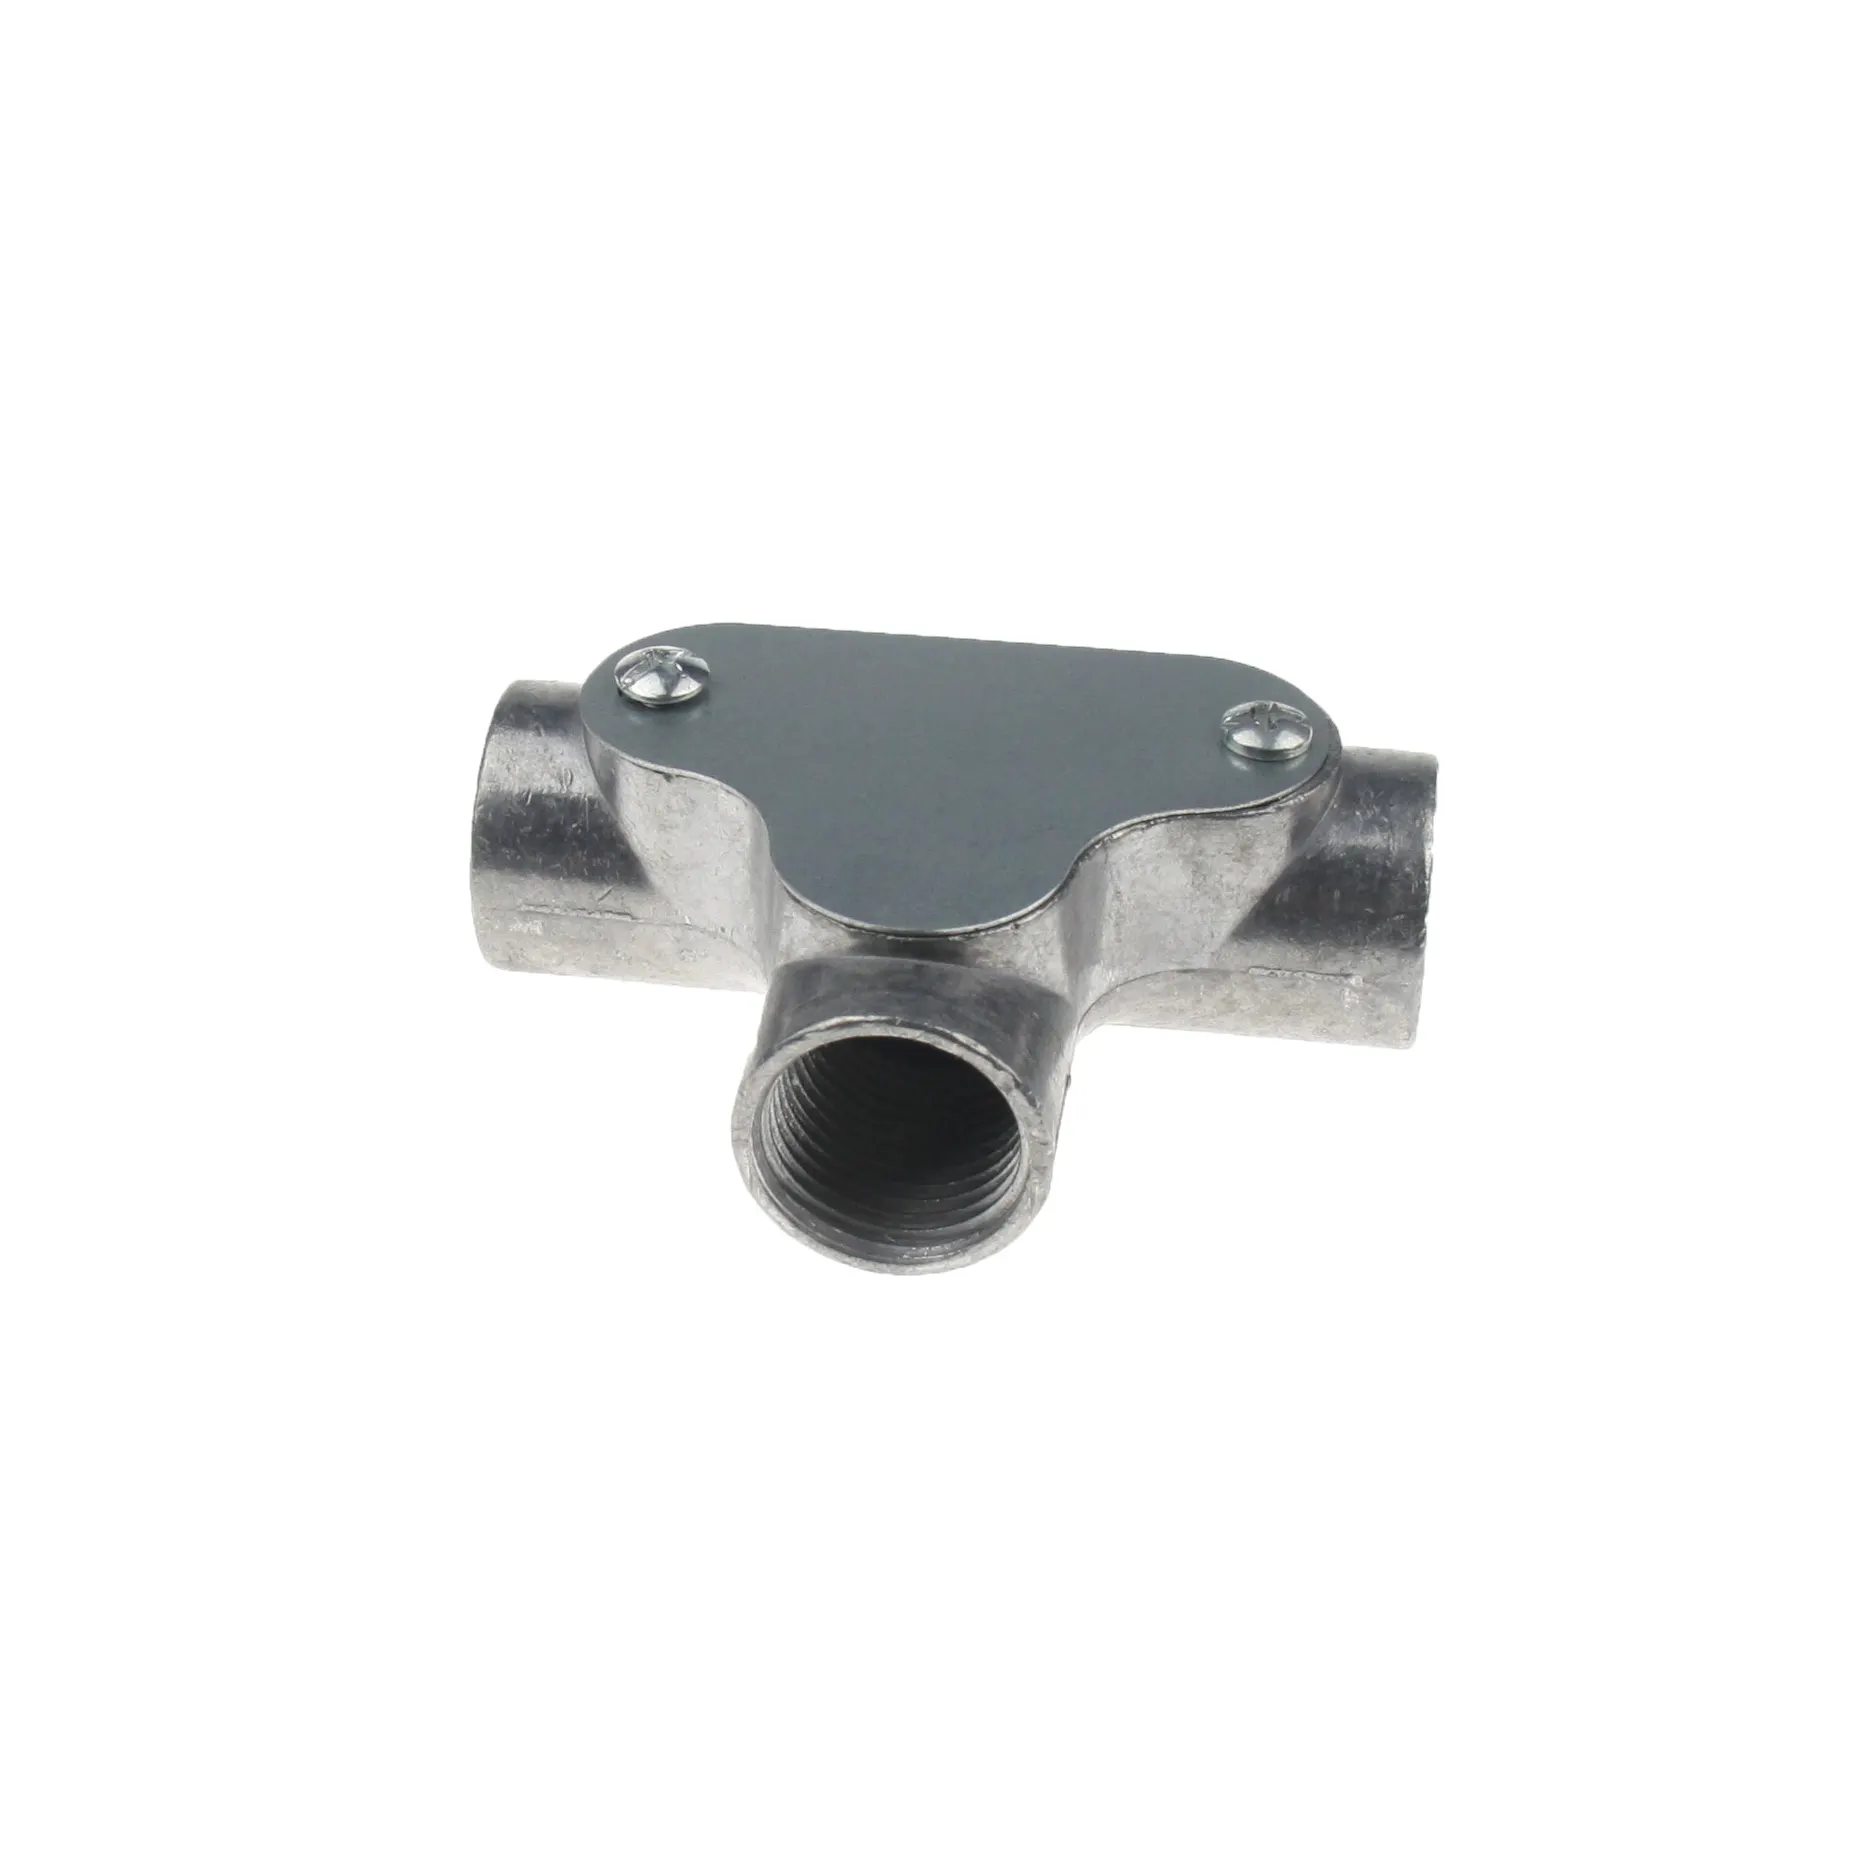 Hot Selling Product Electrical Conduit Fittings Tee Electrical Switch Boxes